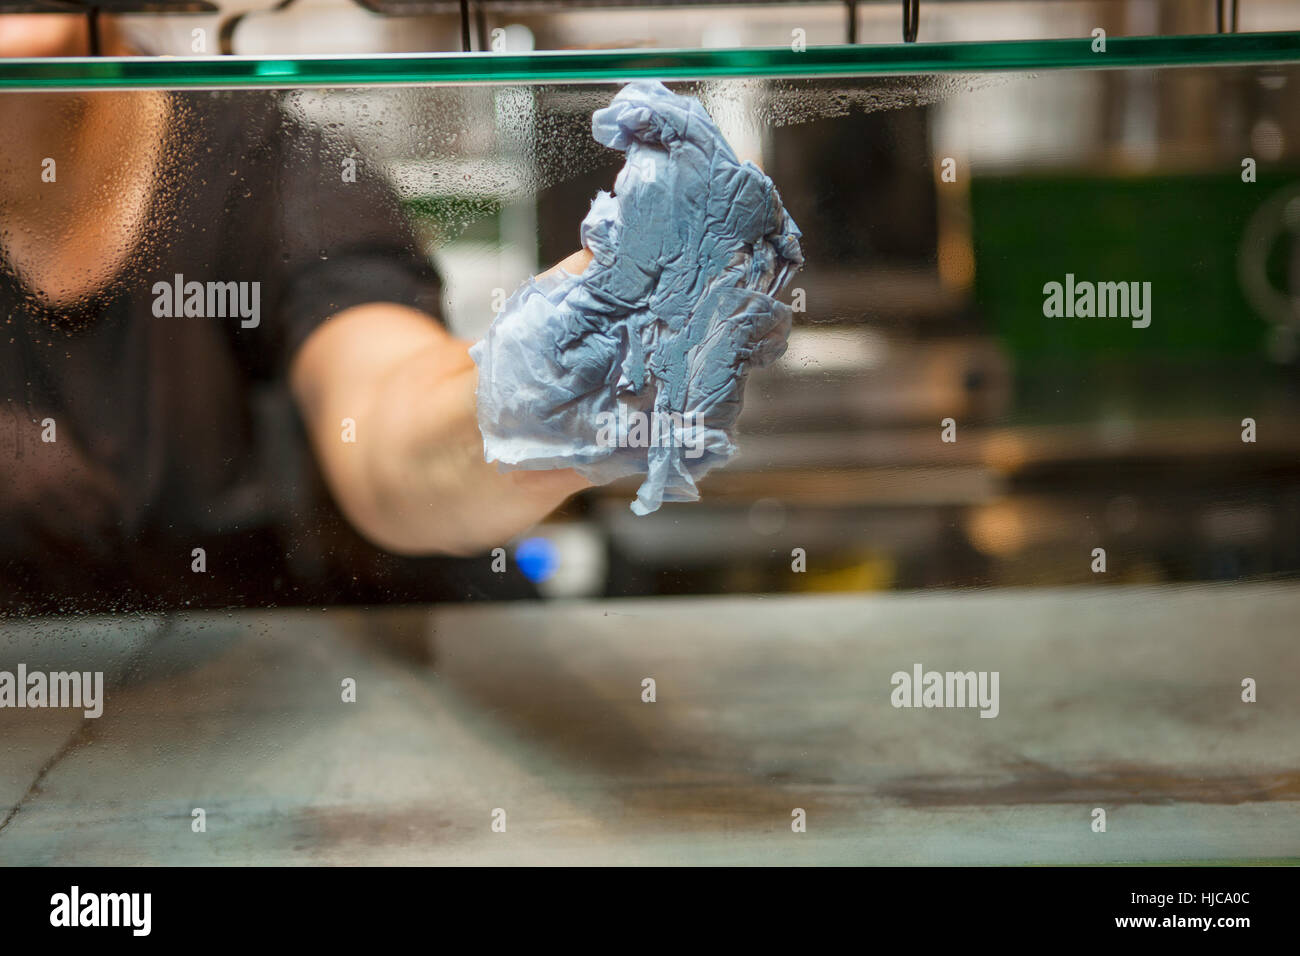 Woman's hand cleaning display case glass in cafe Stock Photo